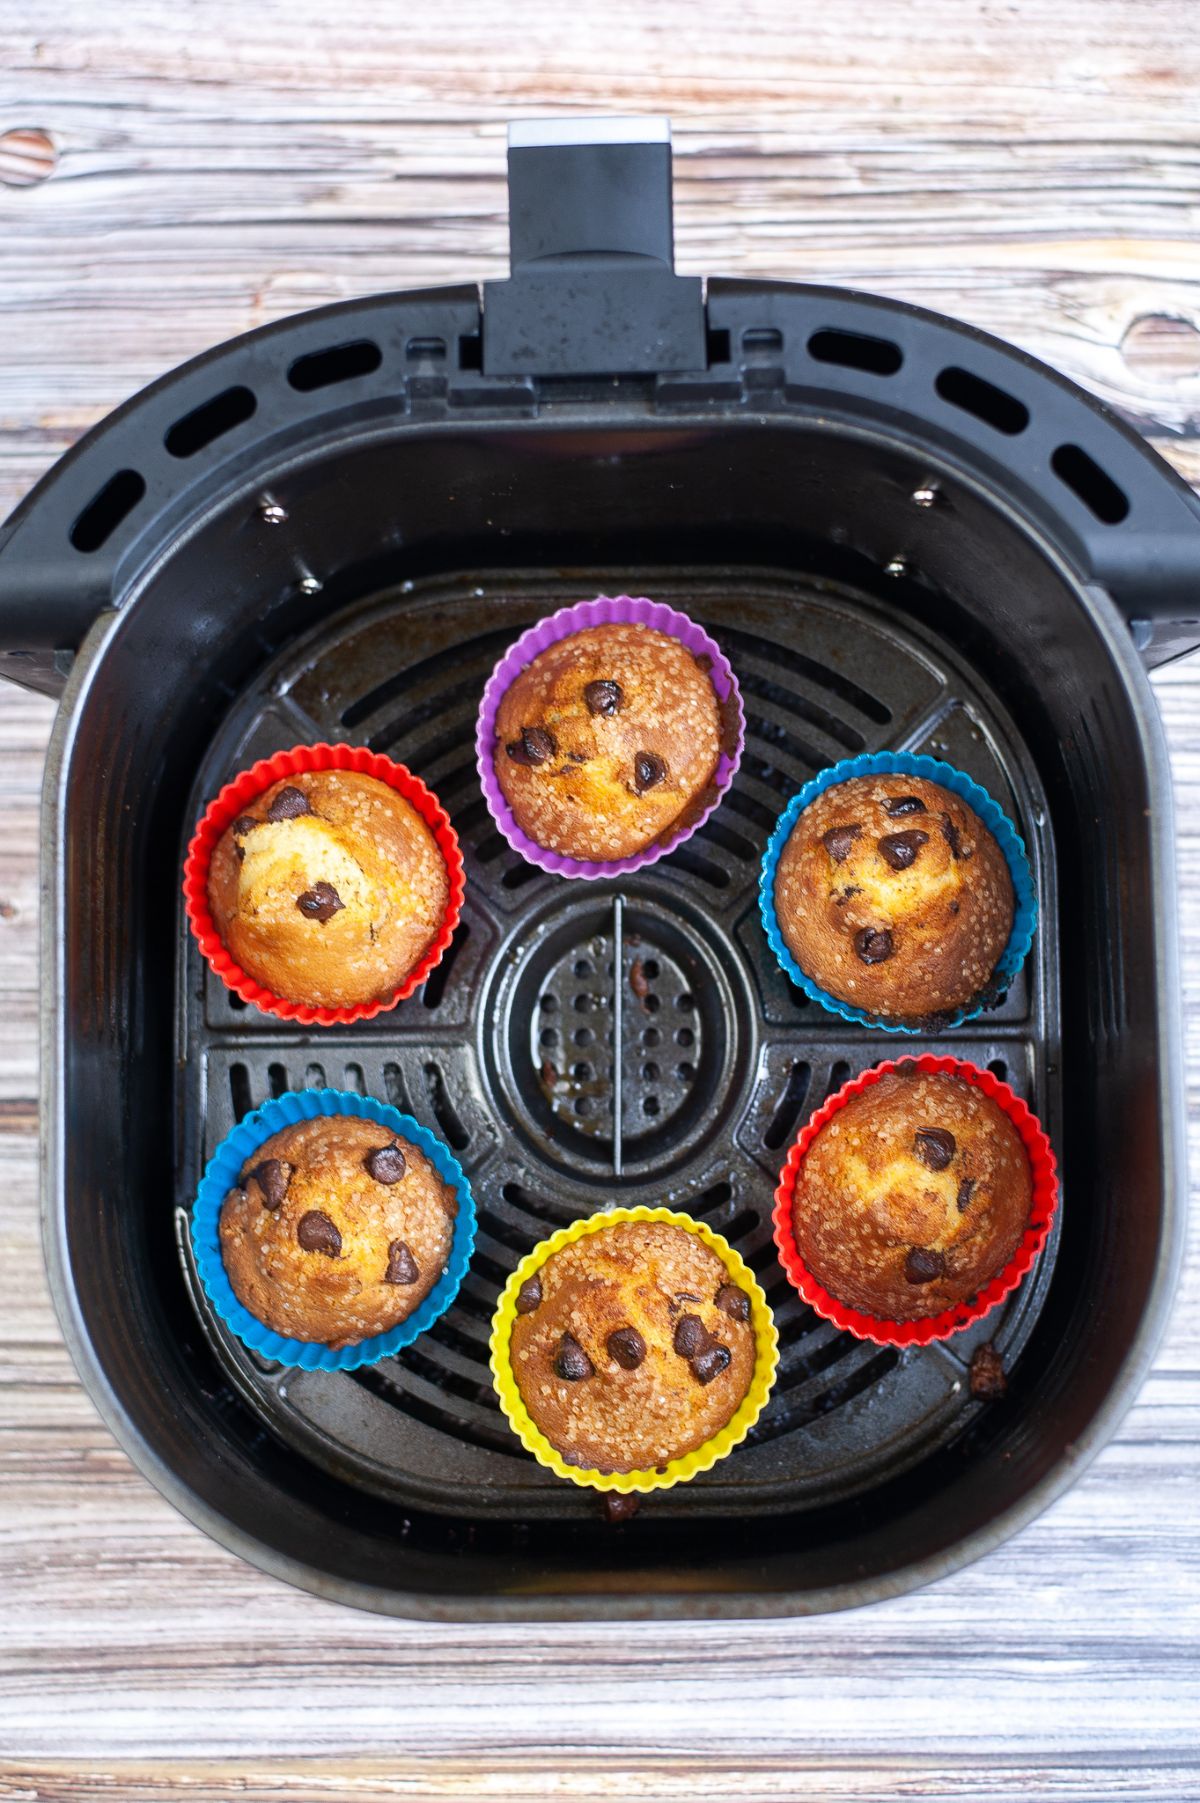 Cooked Chocolate Chip Muffins inside the air fryer